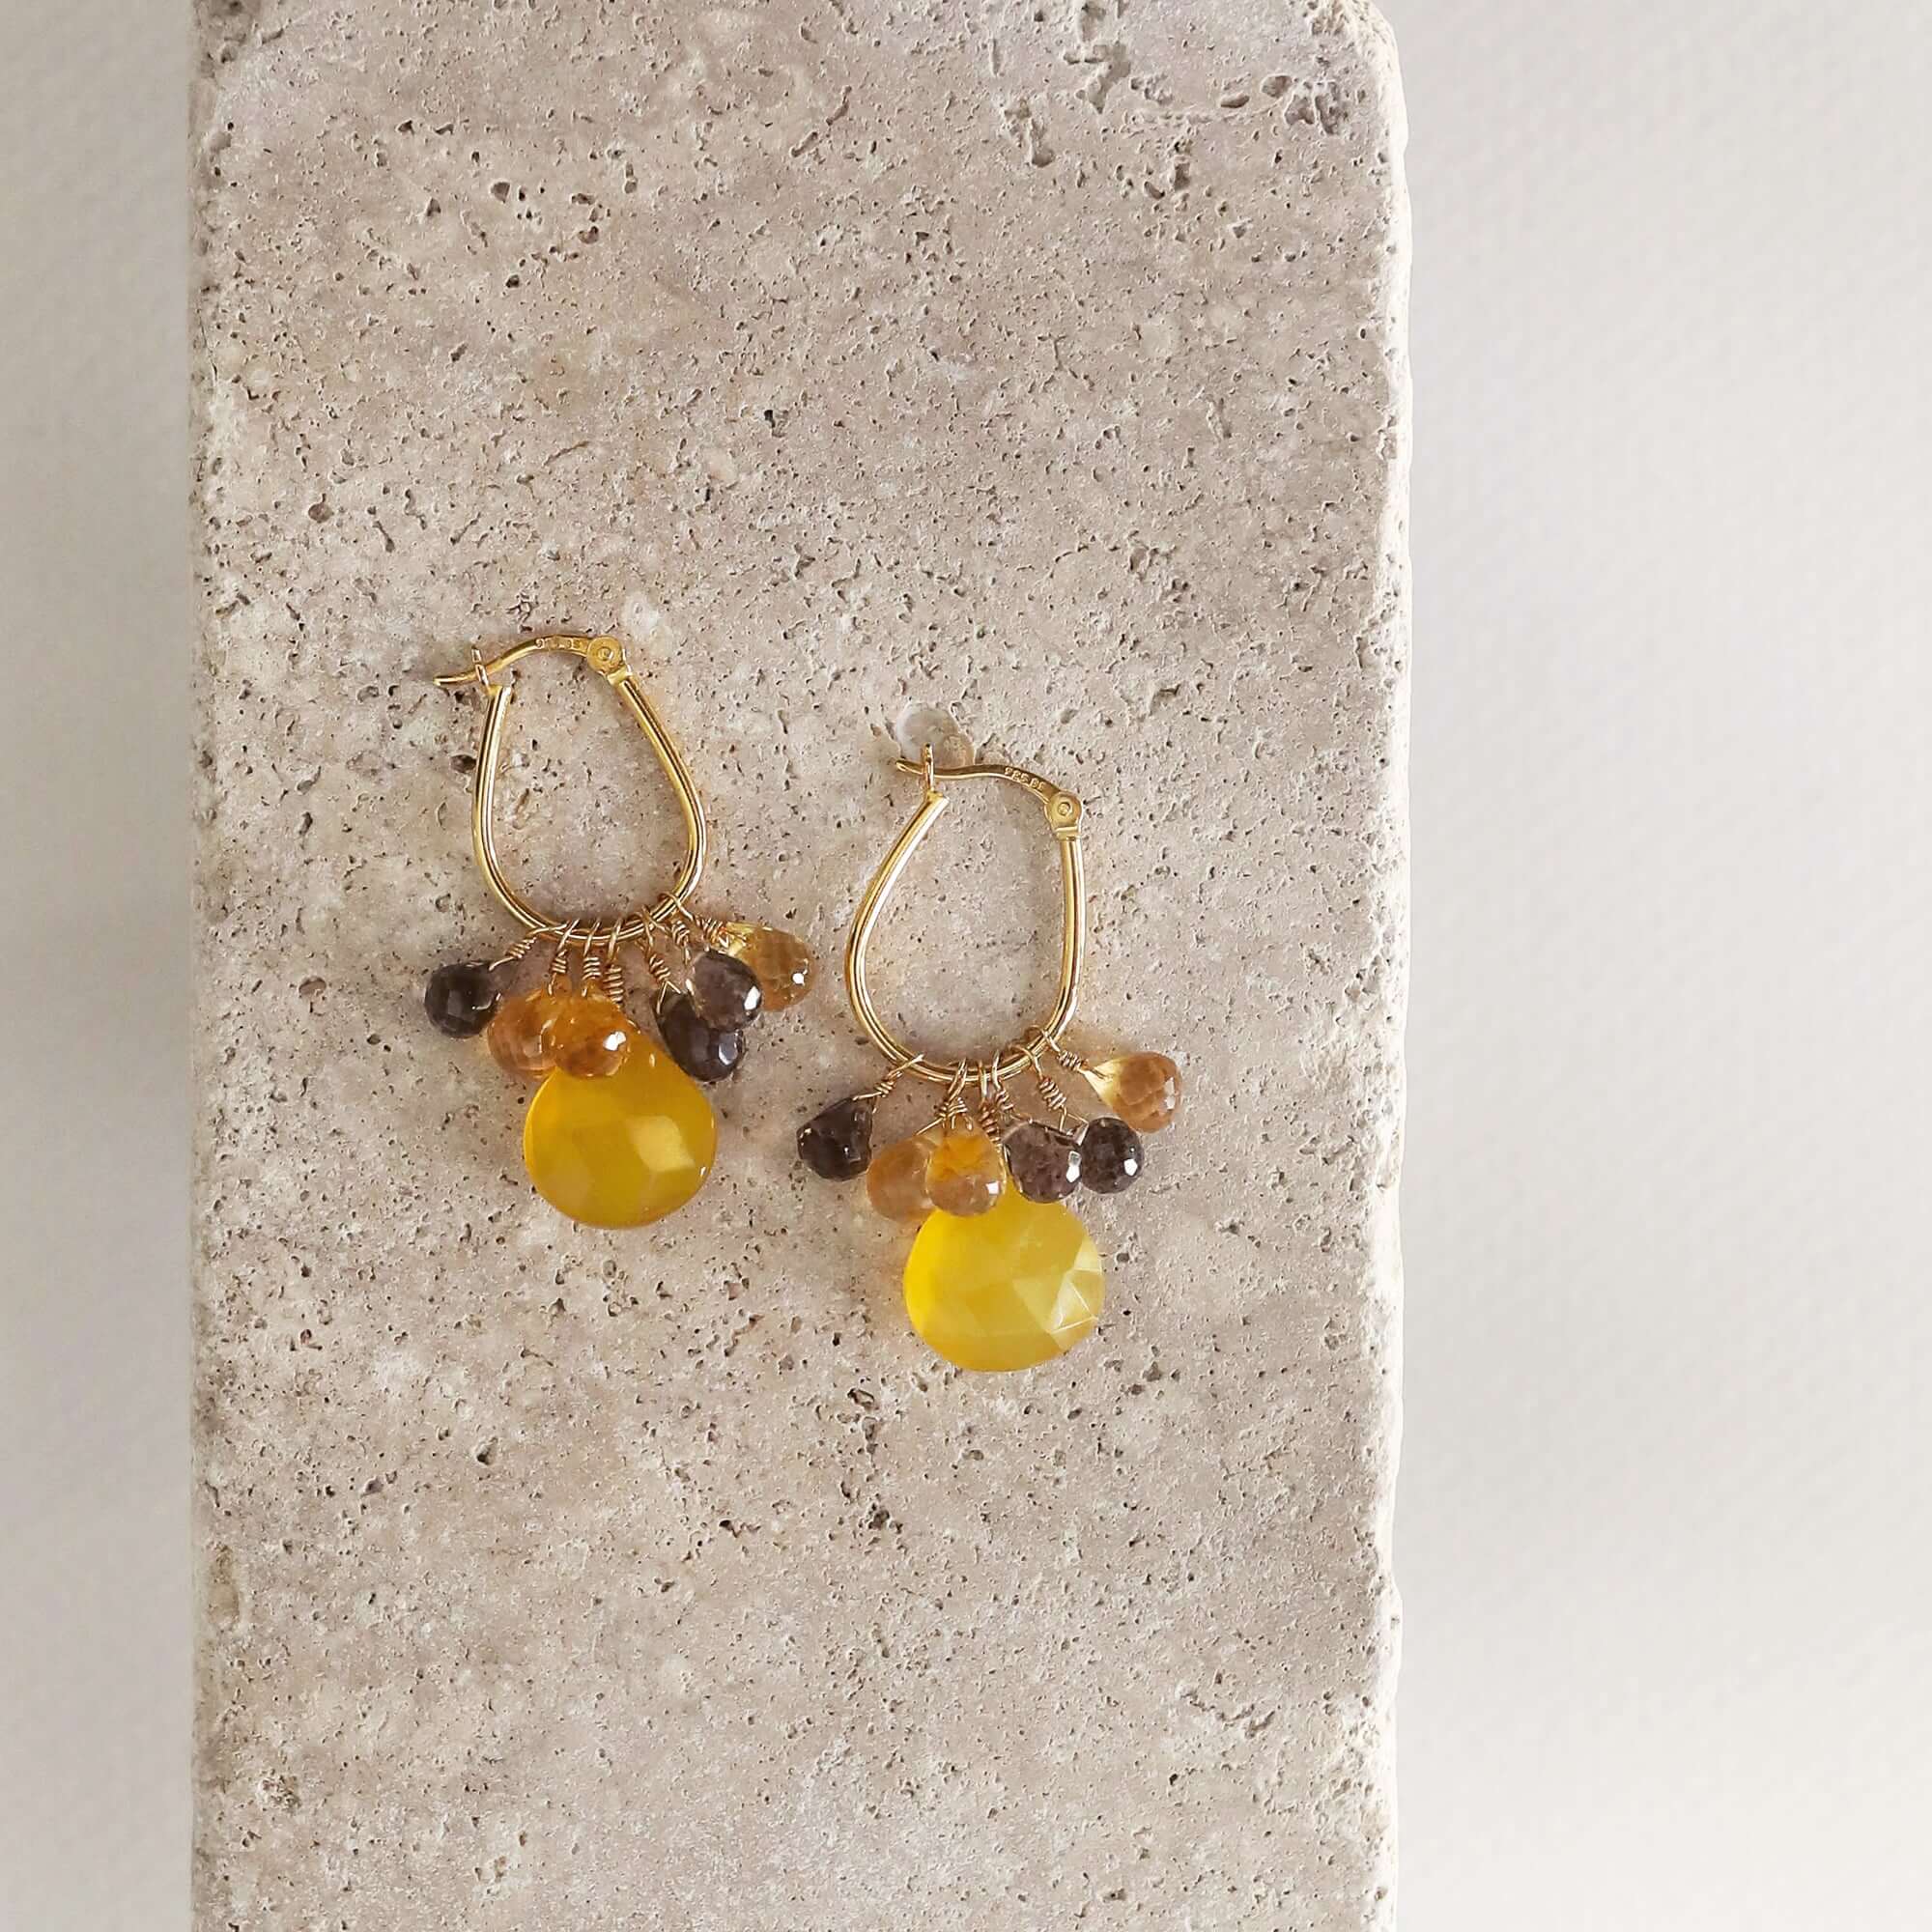 Yellow chalcedony  Gemstone with mini stones  Accents   Gold Drop Earrings